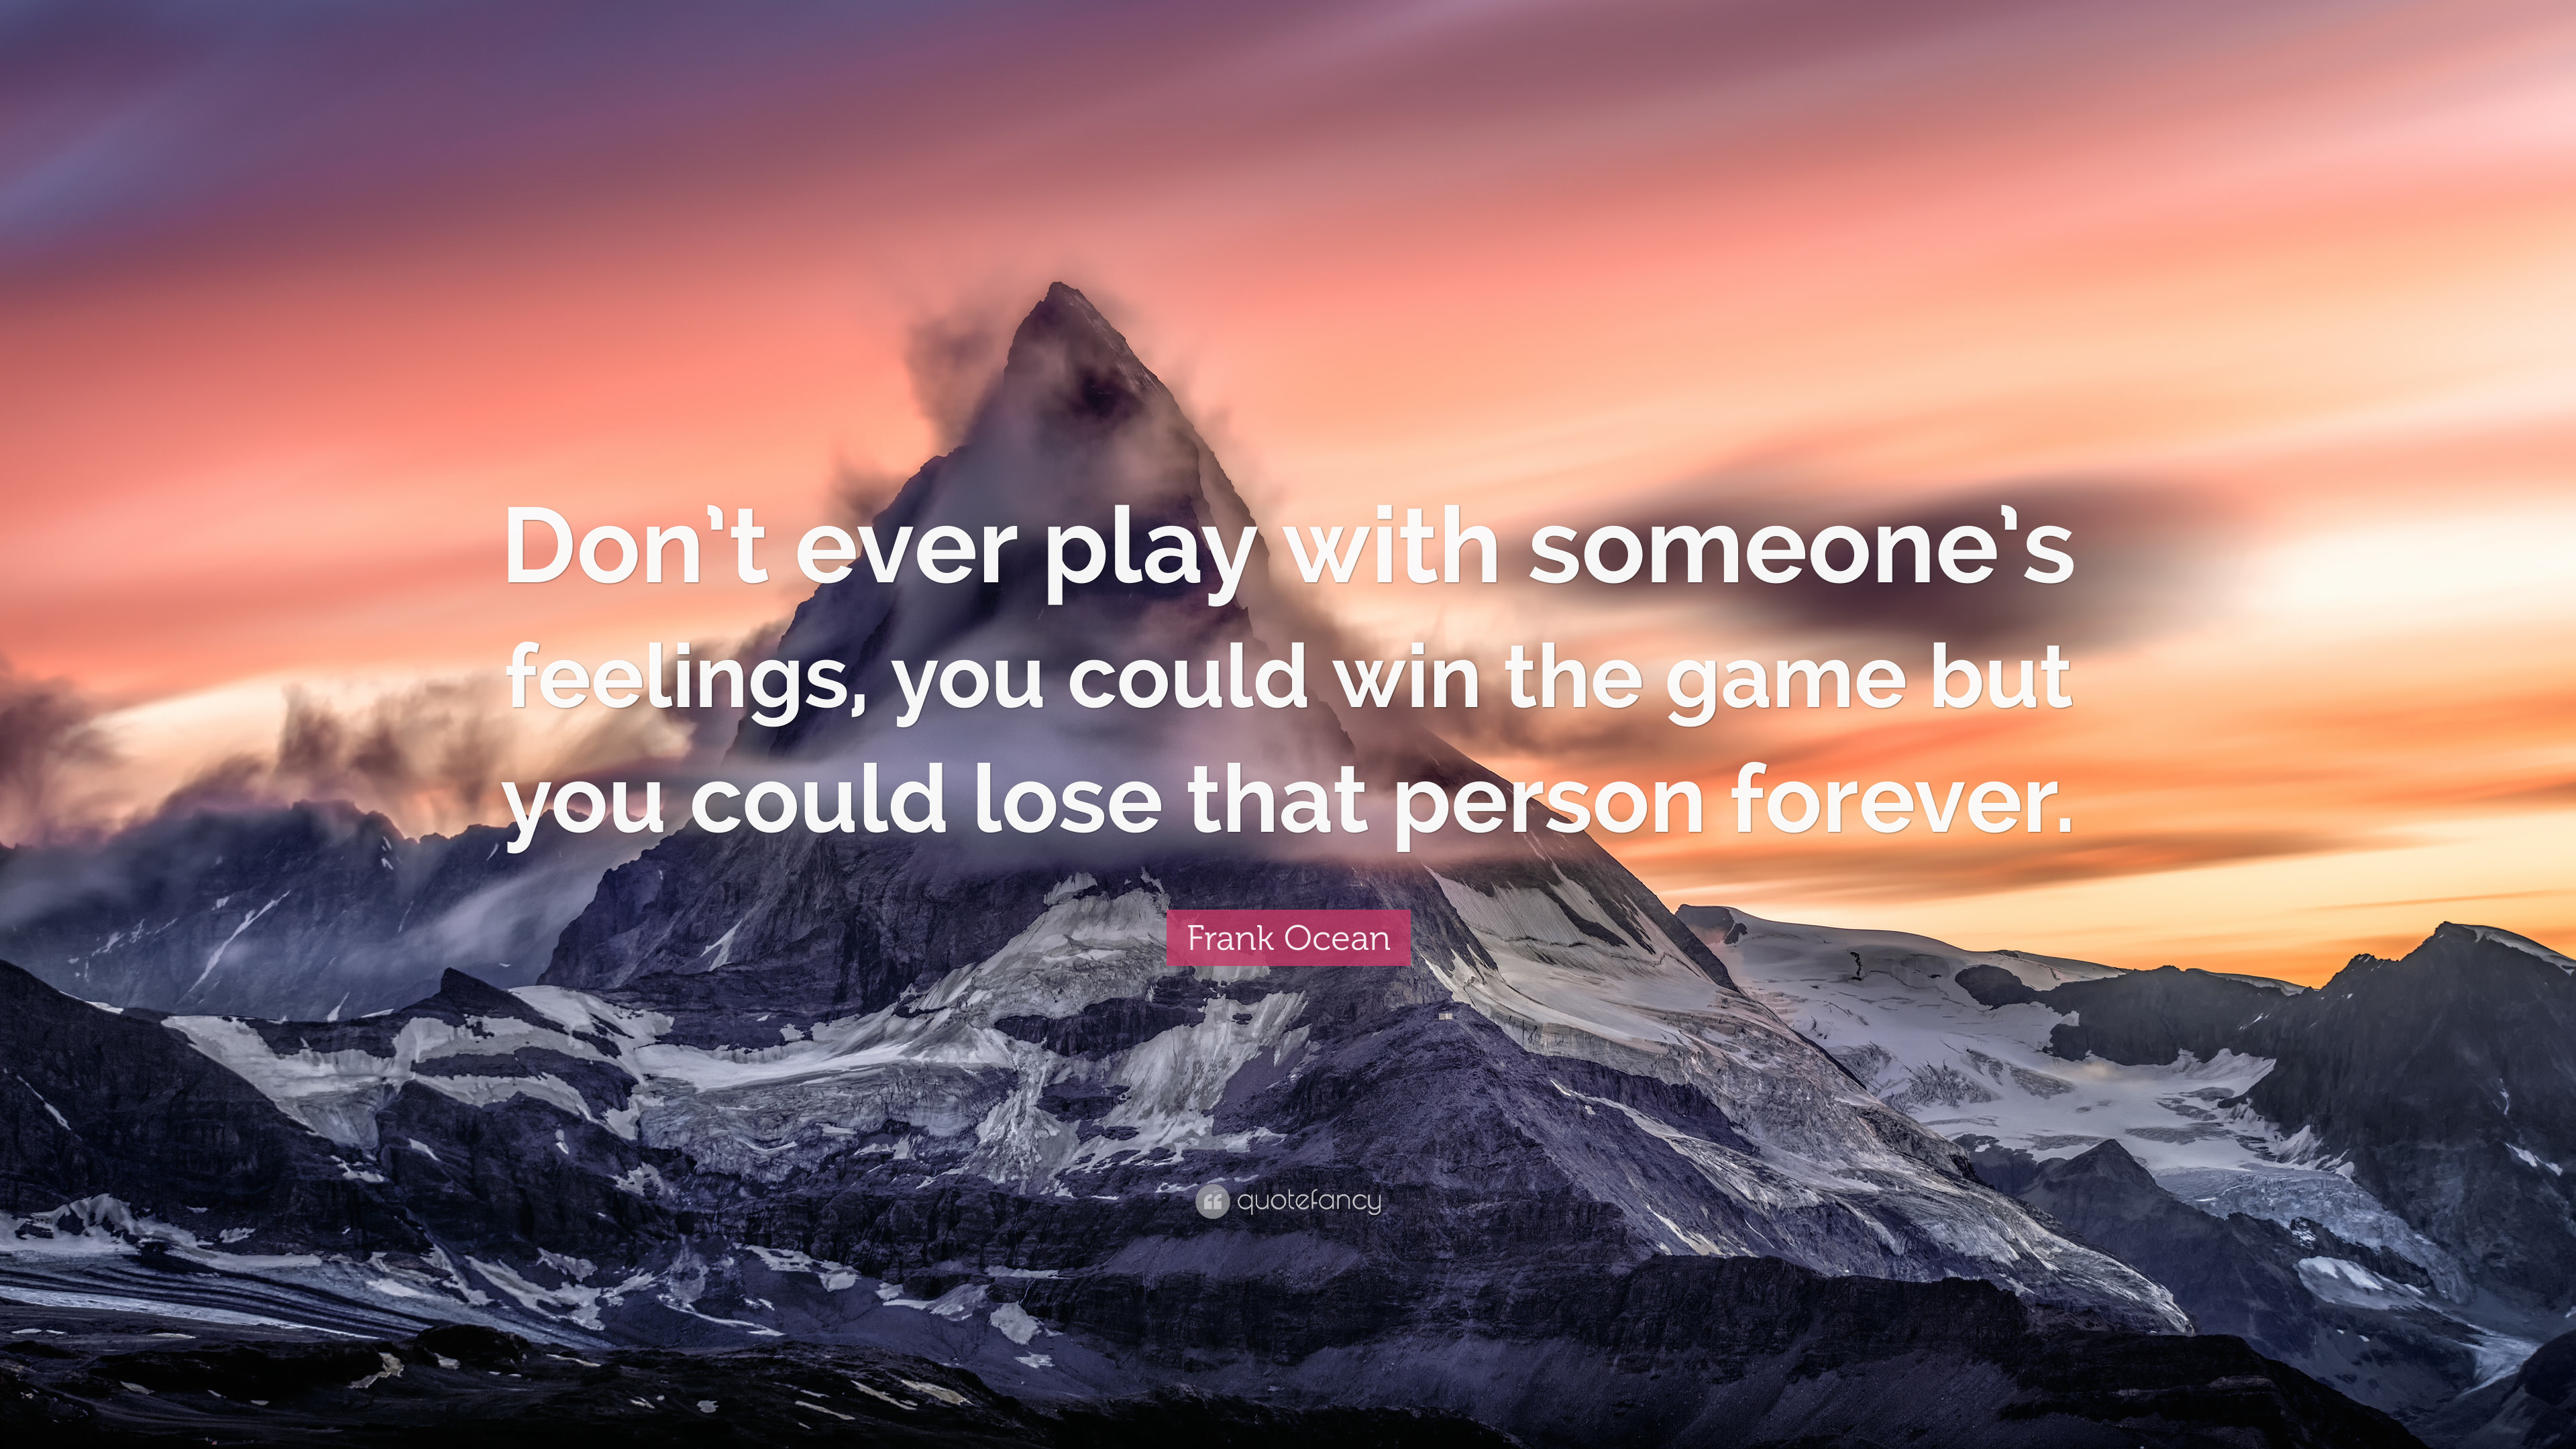 3840x2160 Frank Ocean Quote: “Don't ever play with someone's feelings, you could